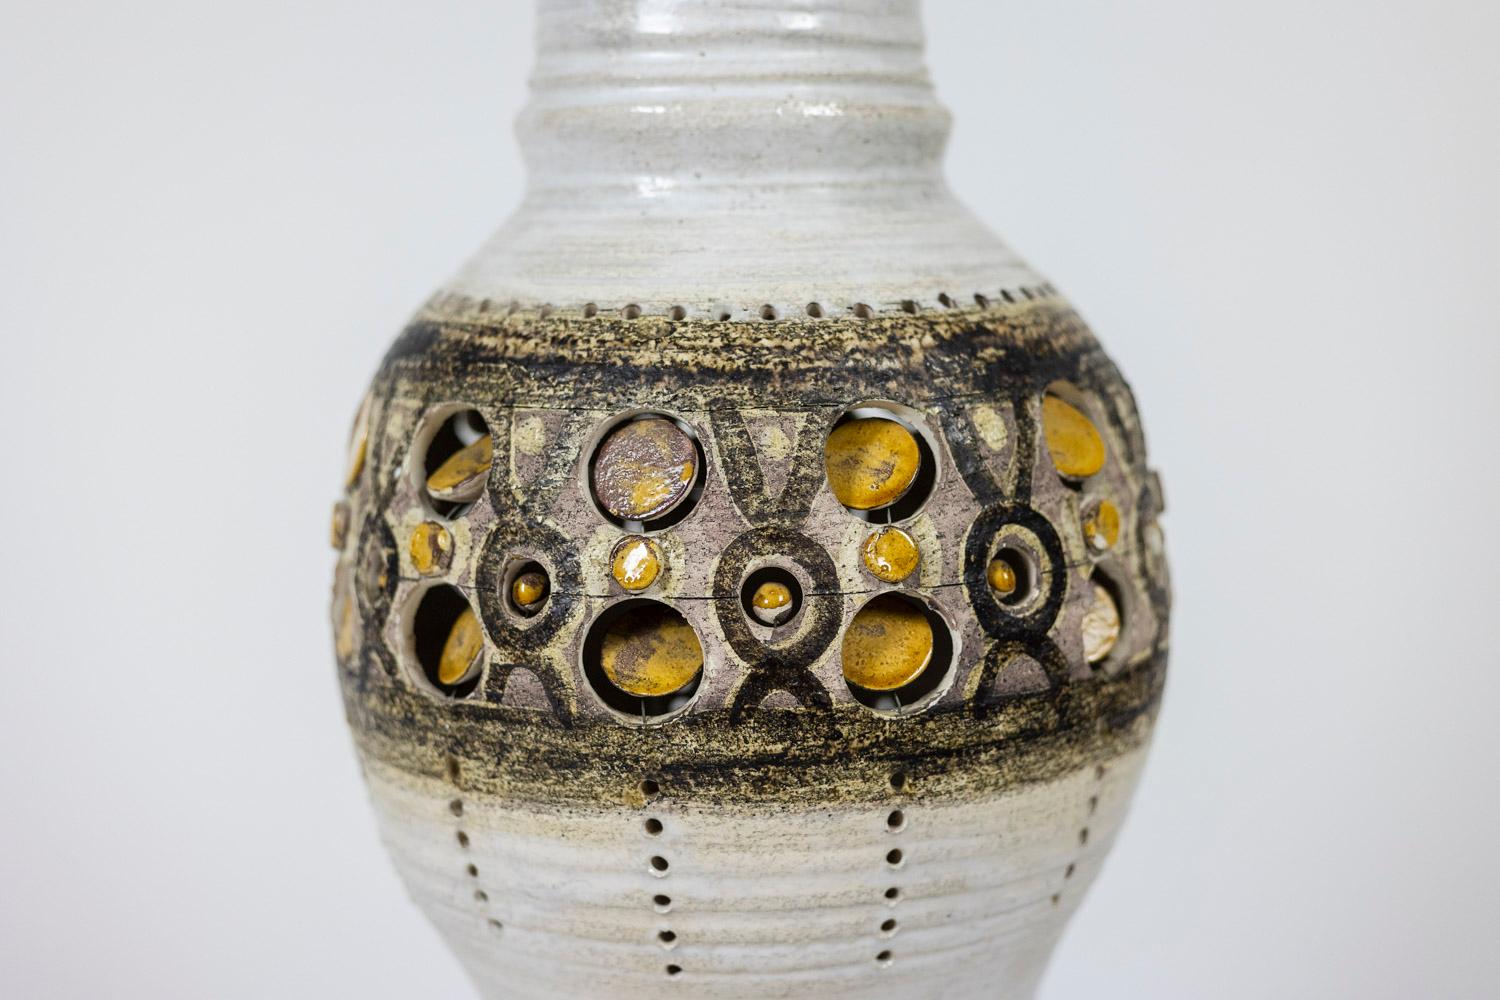 Georges Pelletier, attributed to.

Ceramic lamp, cream-white and brown tones, adorned with perforations and circles in yellow tones.

French work realized in the 1970s.